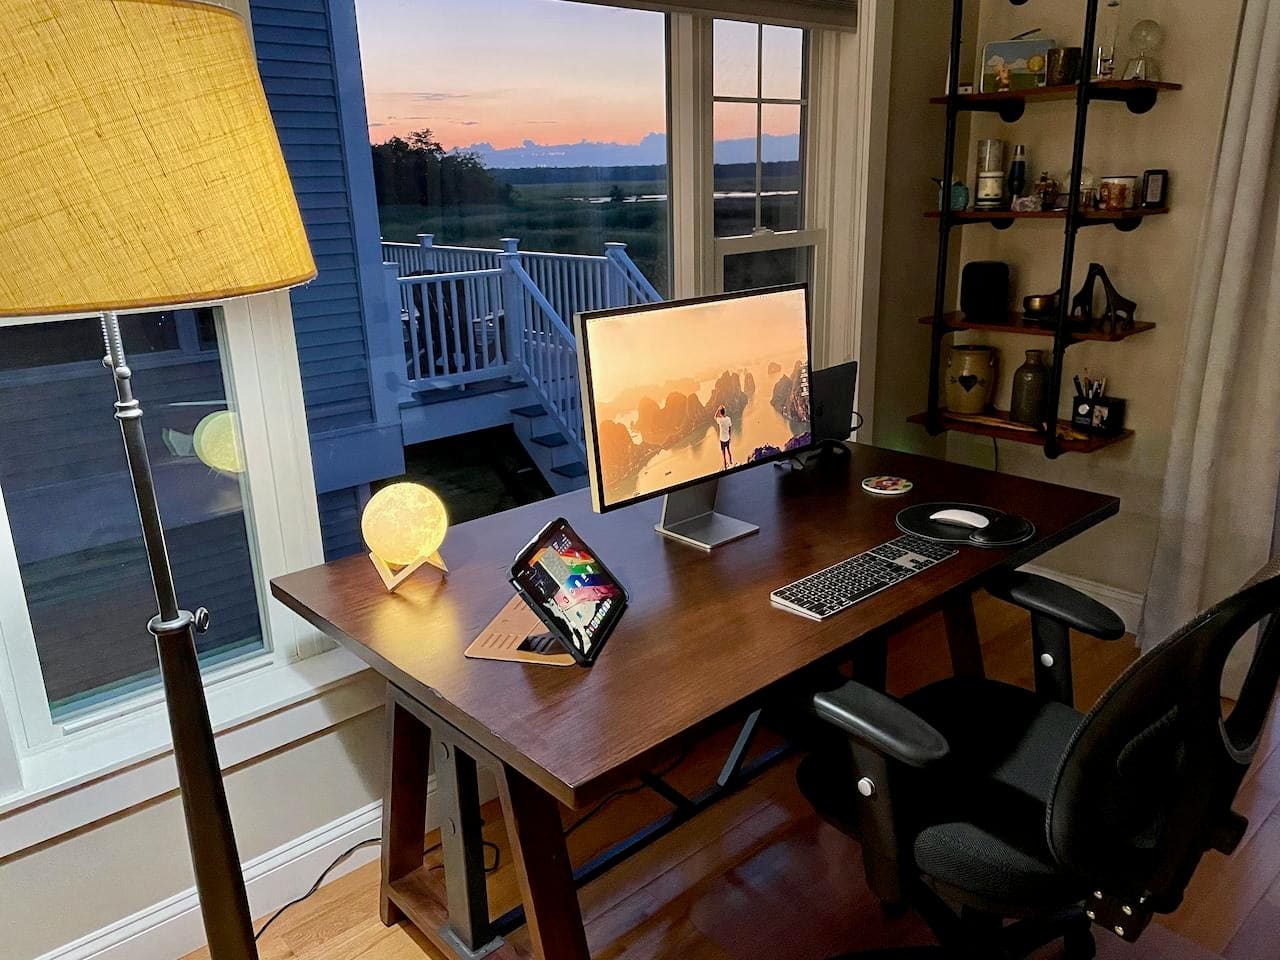 An M1 MacBook Pro and Studio Display enjoy the sunset by the coast north of Boston.